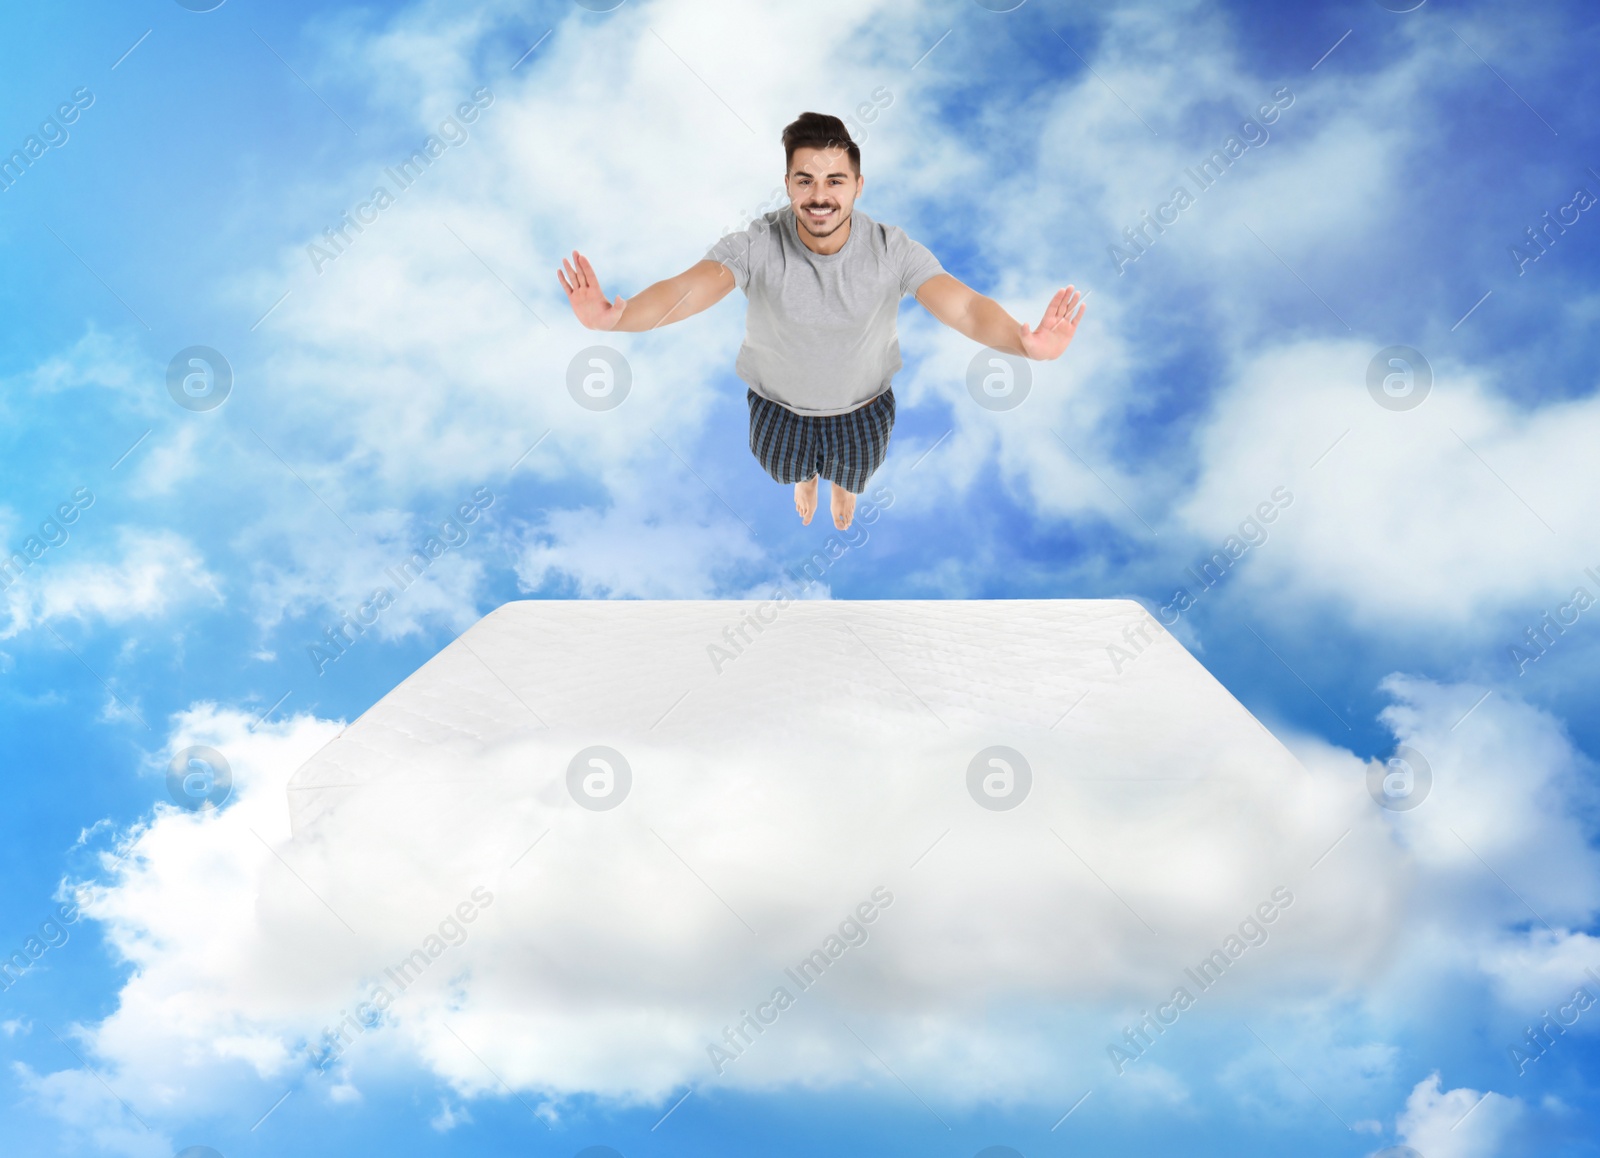 Image of Young man jumping on mattress in clouds